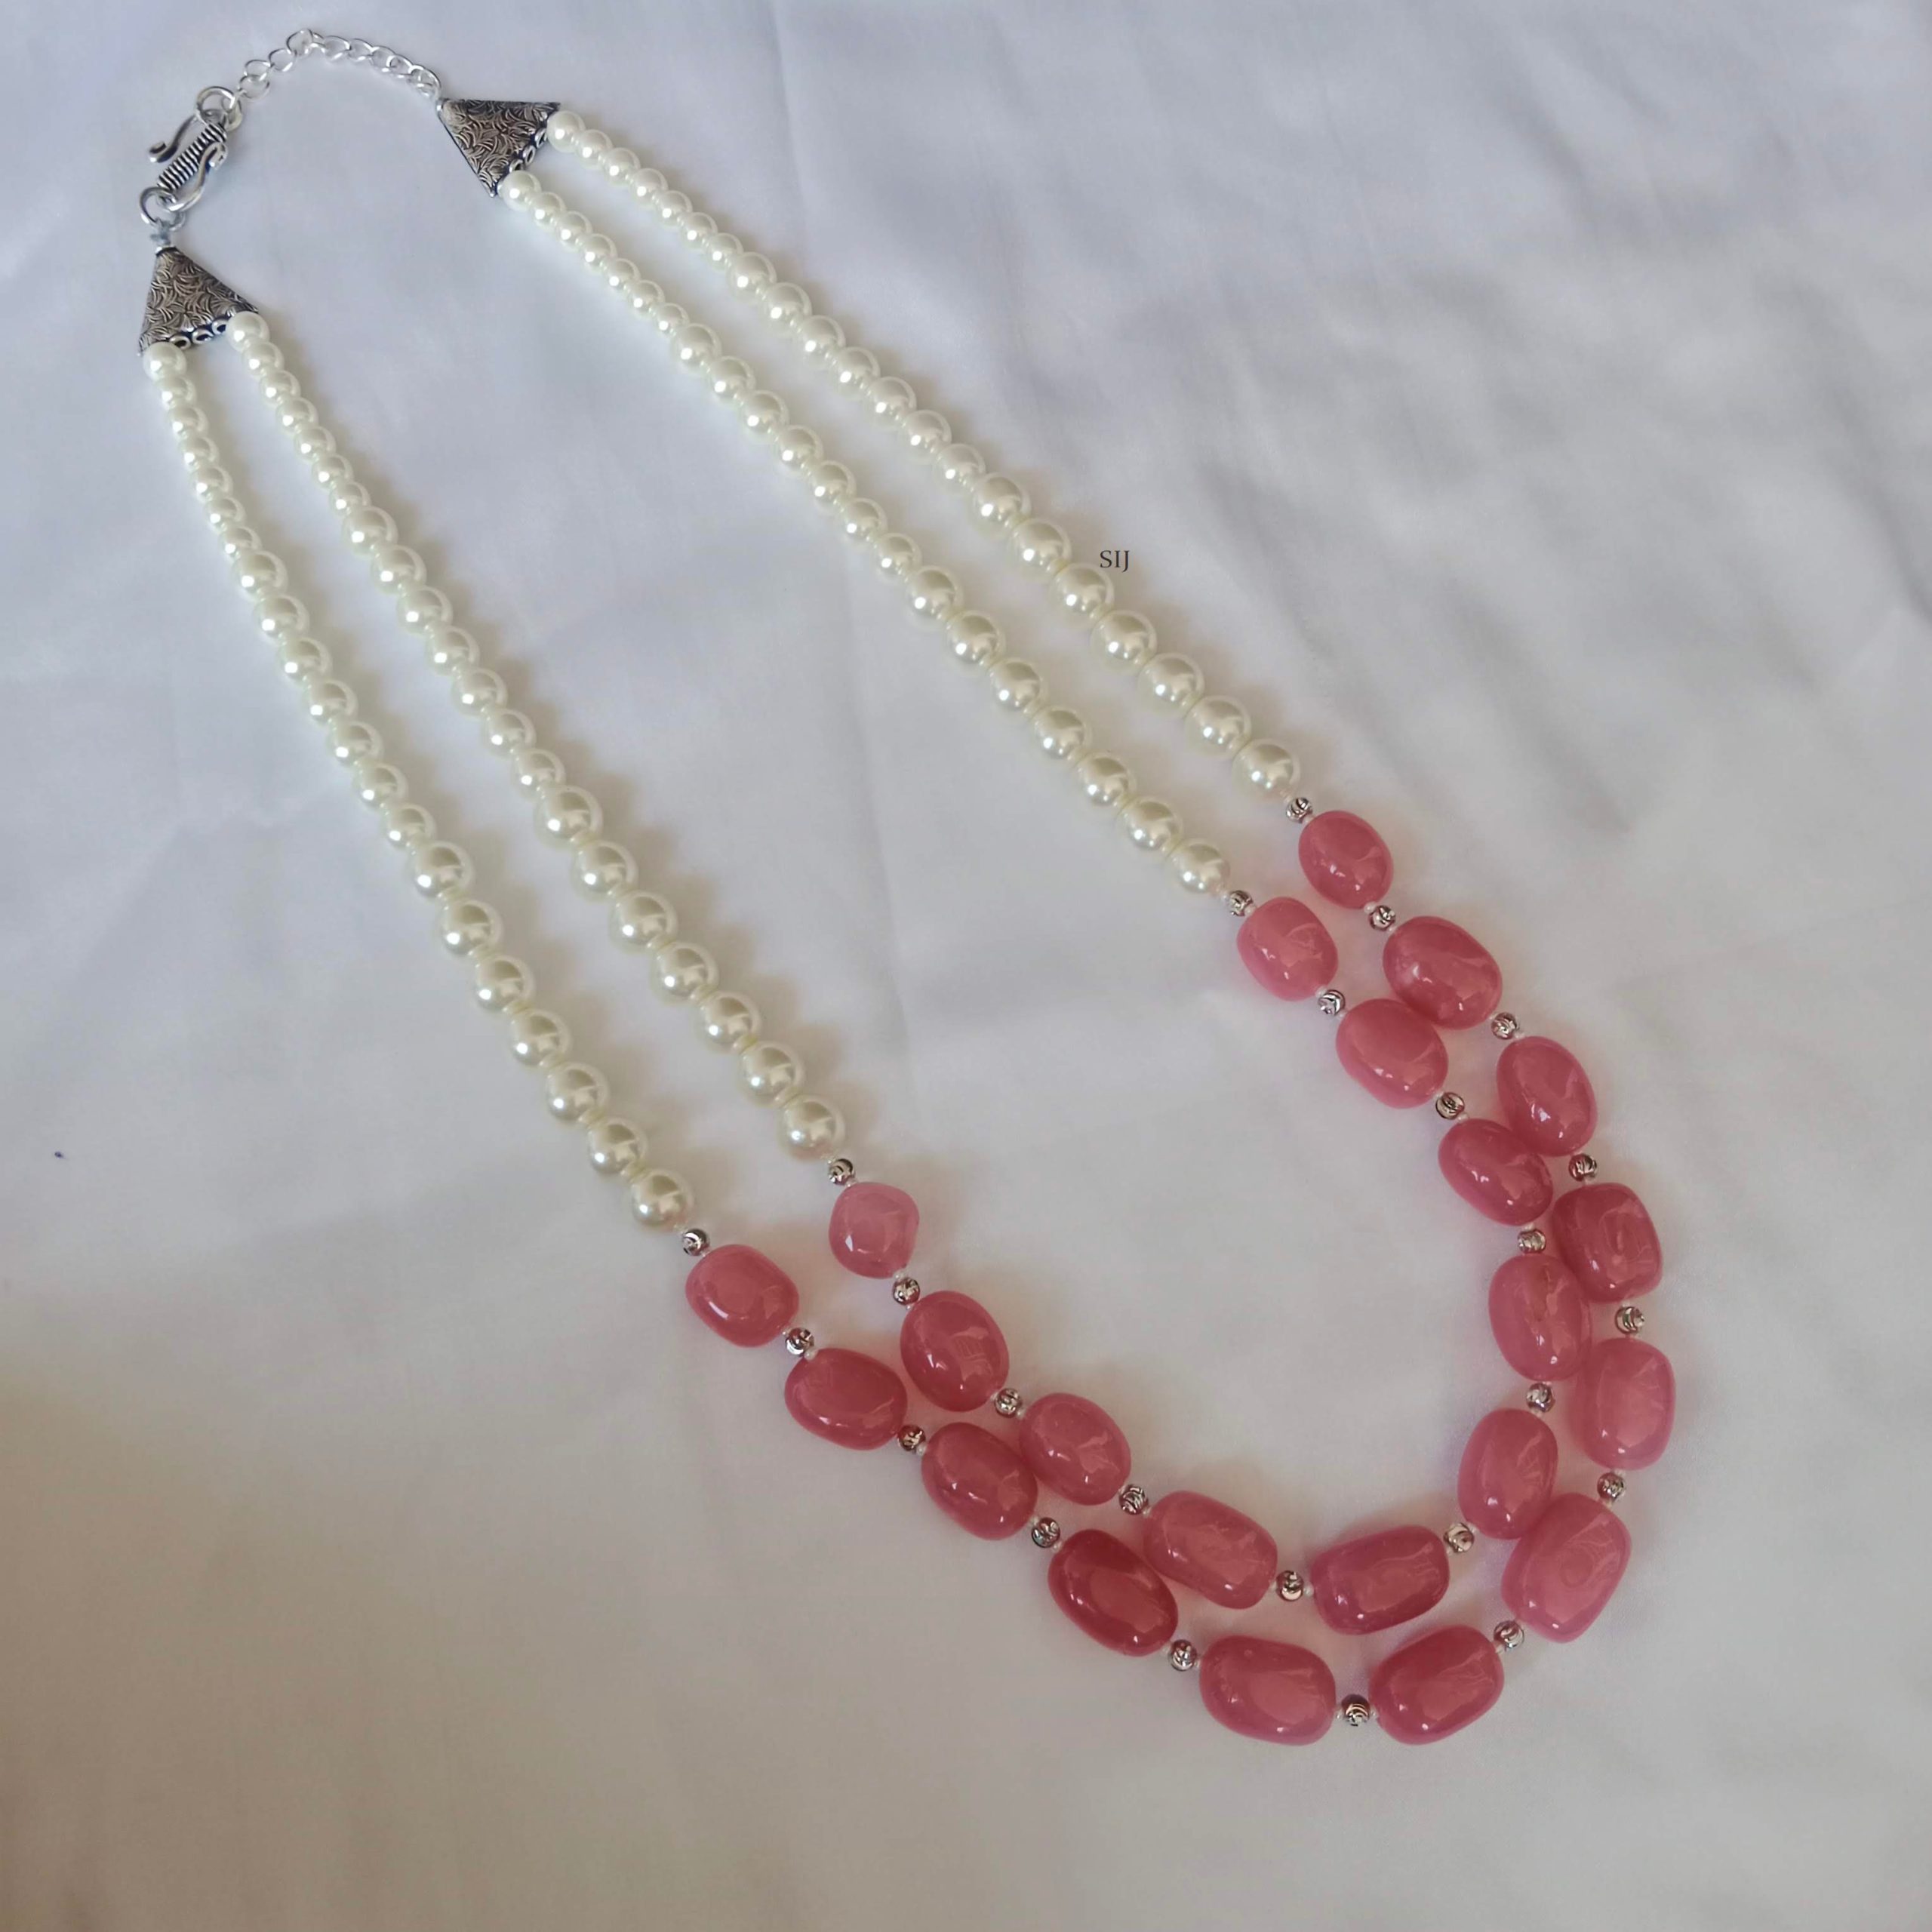 Artificial Pearls and Pink / Red Beads Necklace